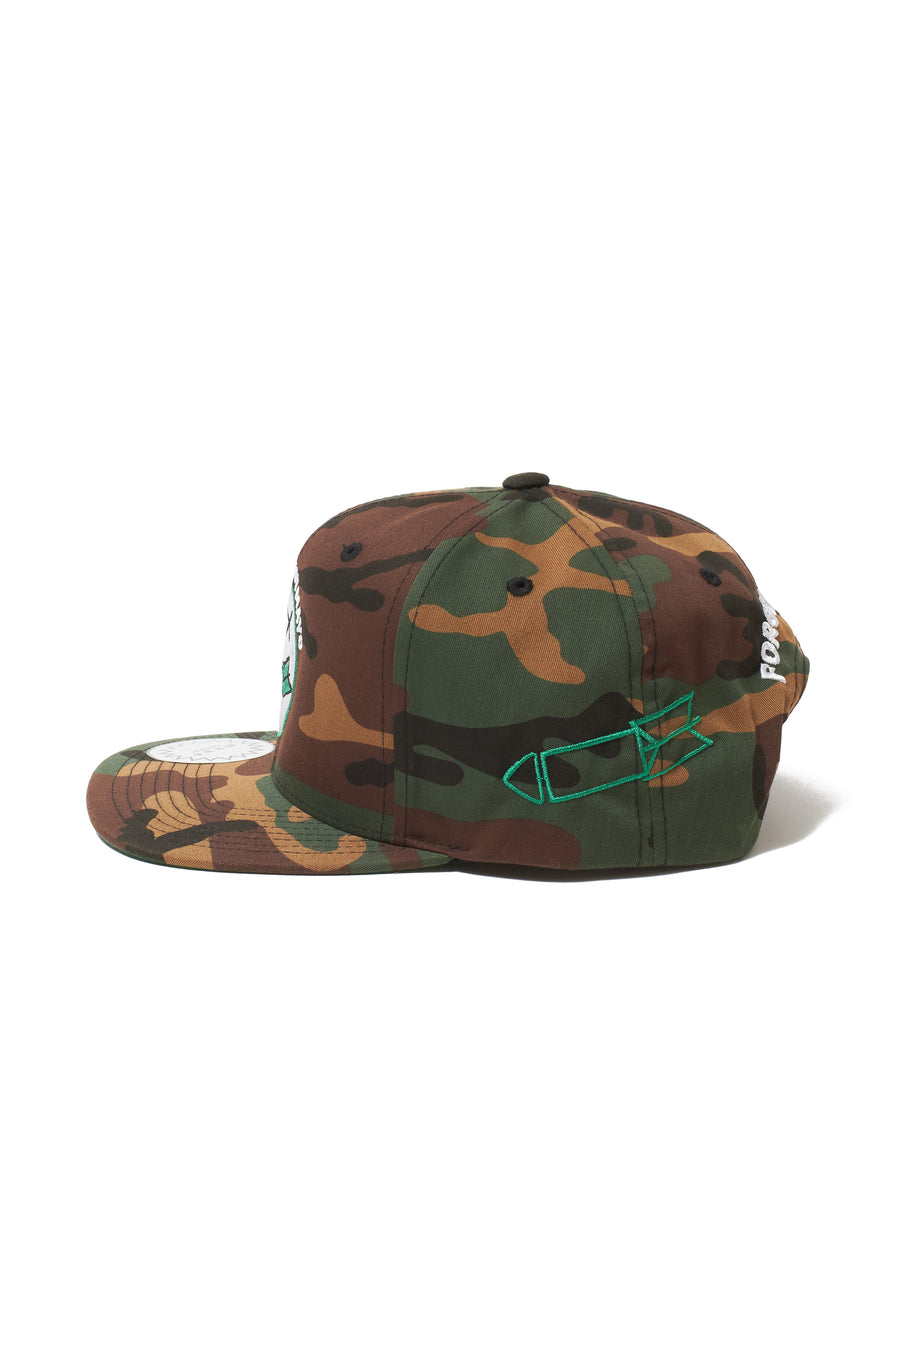 【WEB LIMITED】MAYO RAT FORGET ME NOT Embroidery CAP - CAMO